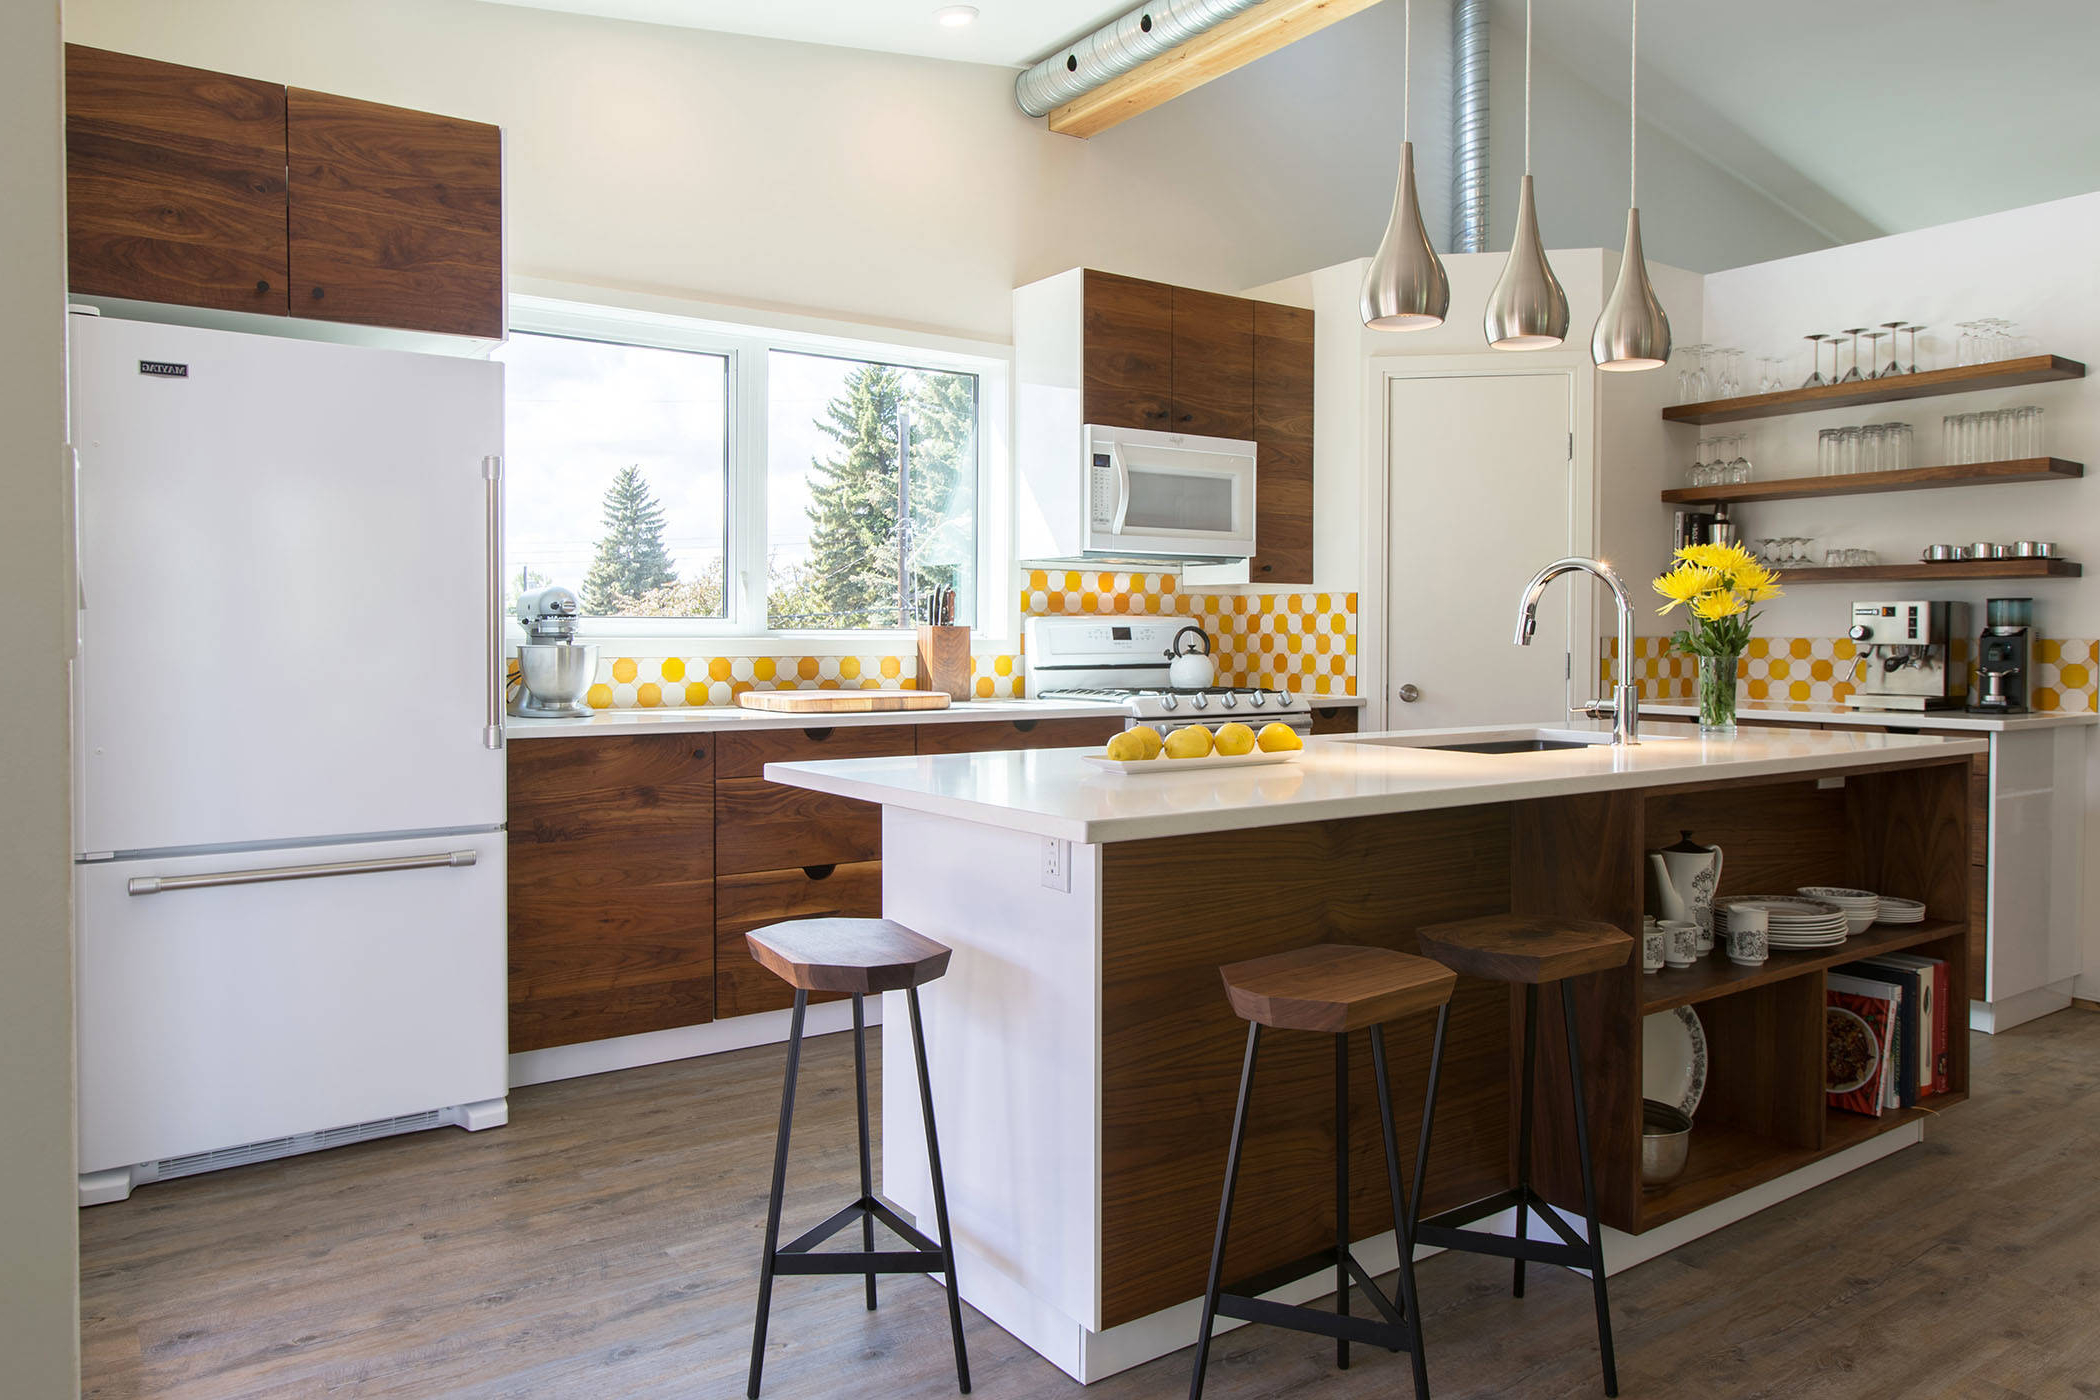 18 Hot Kitchen Renovation Tips Designs That Will